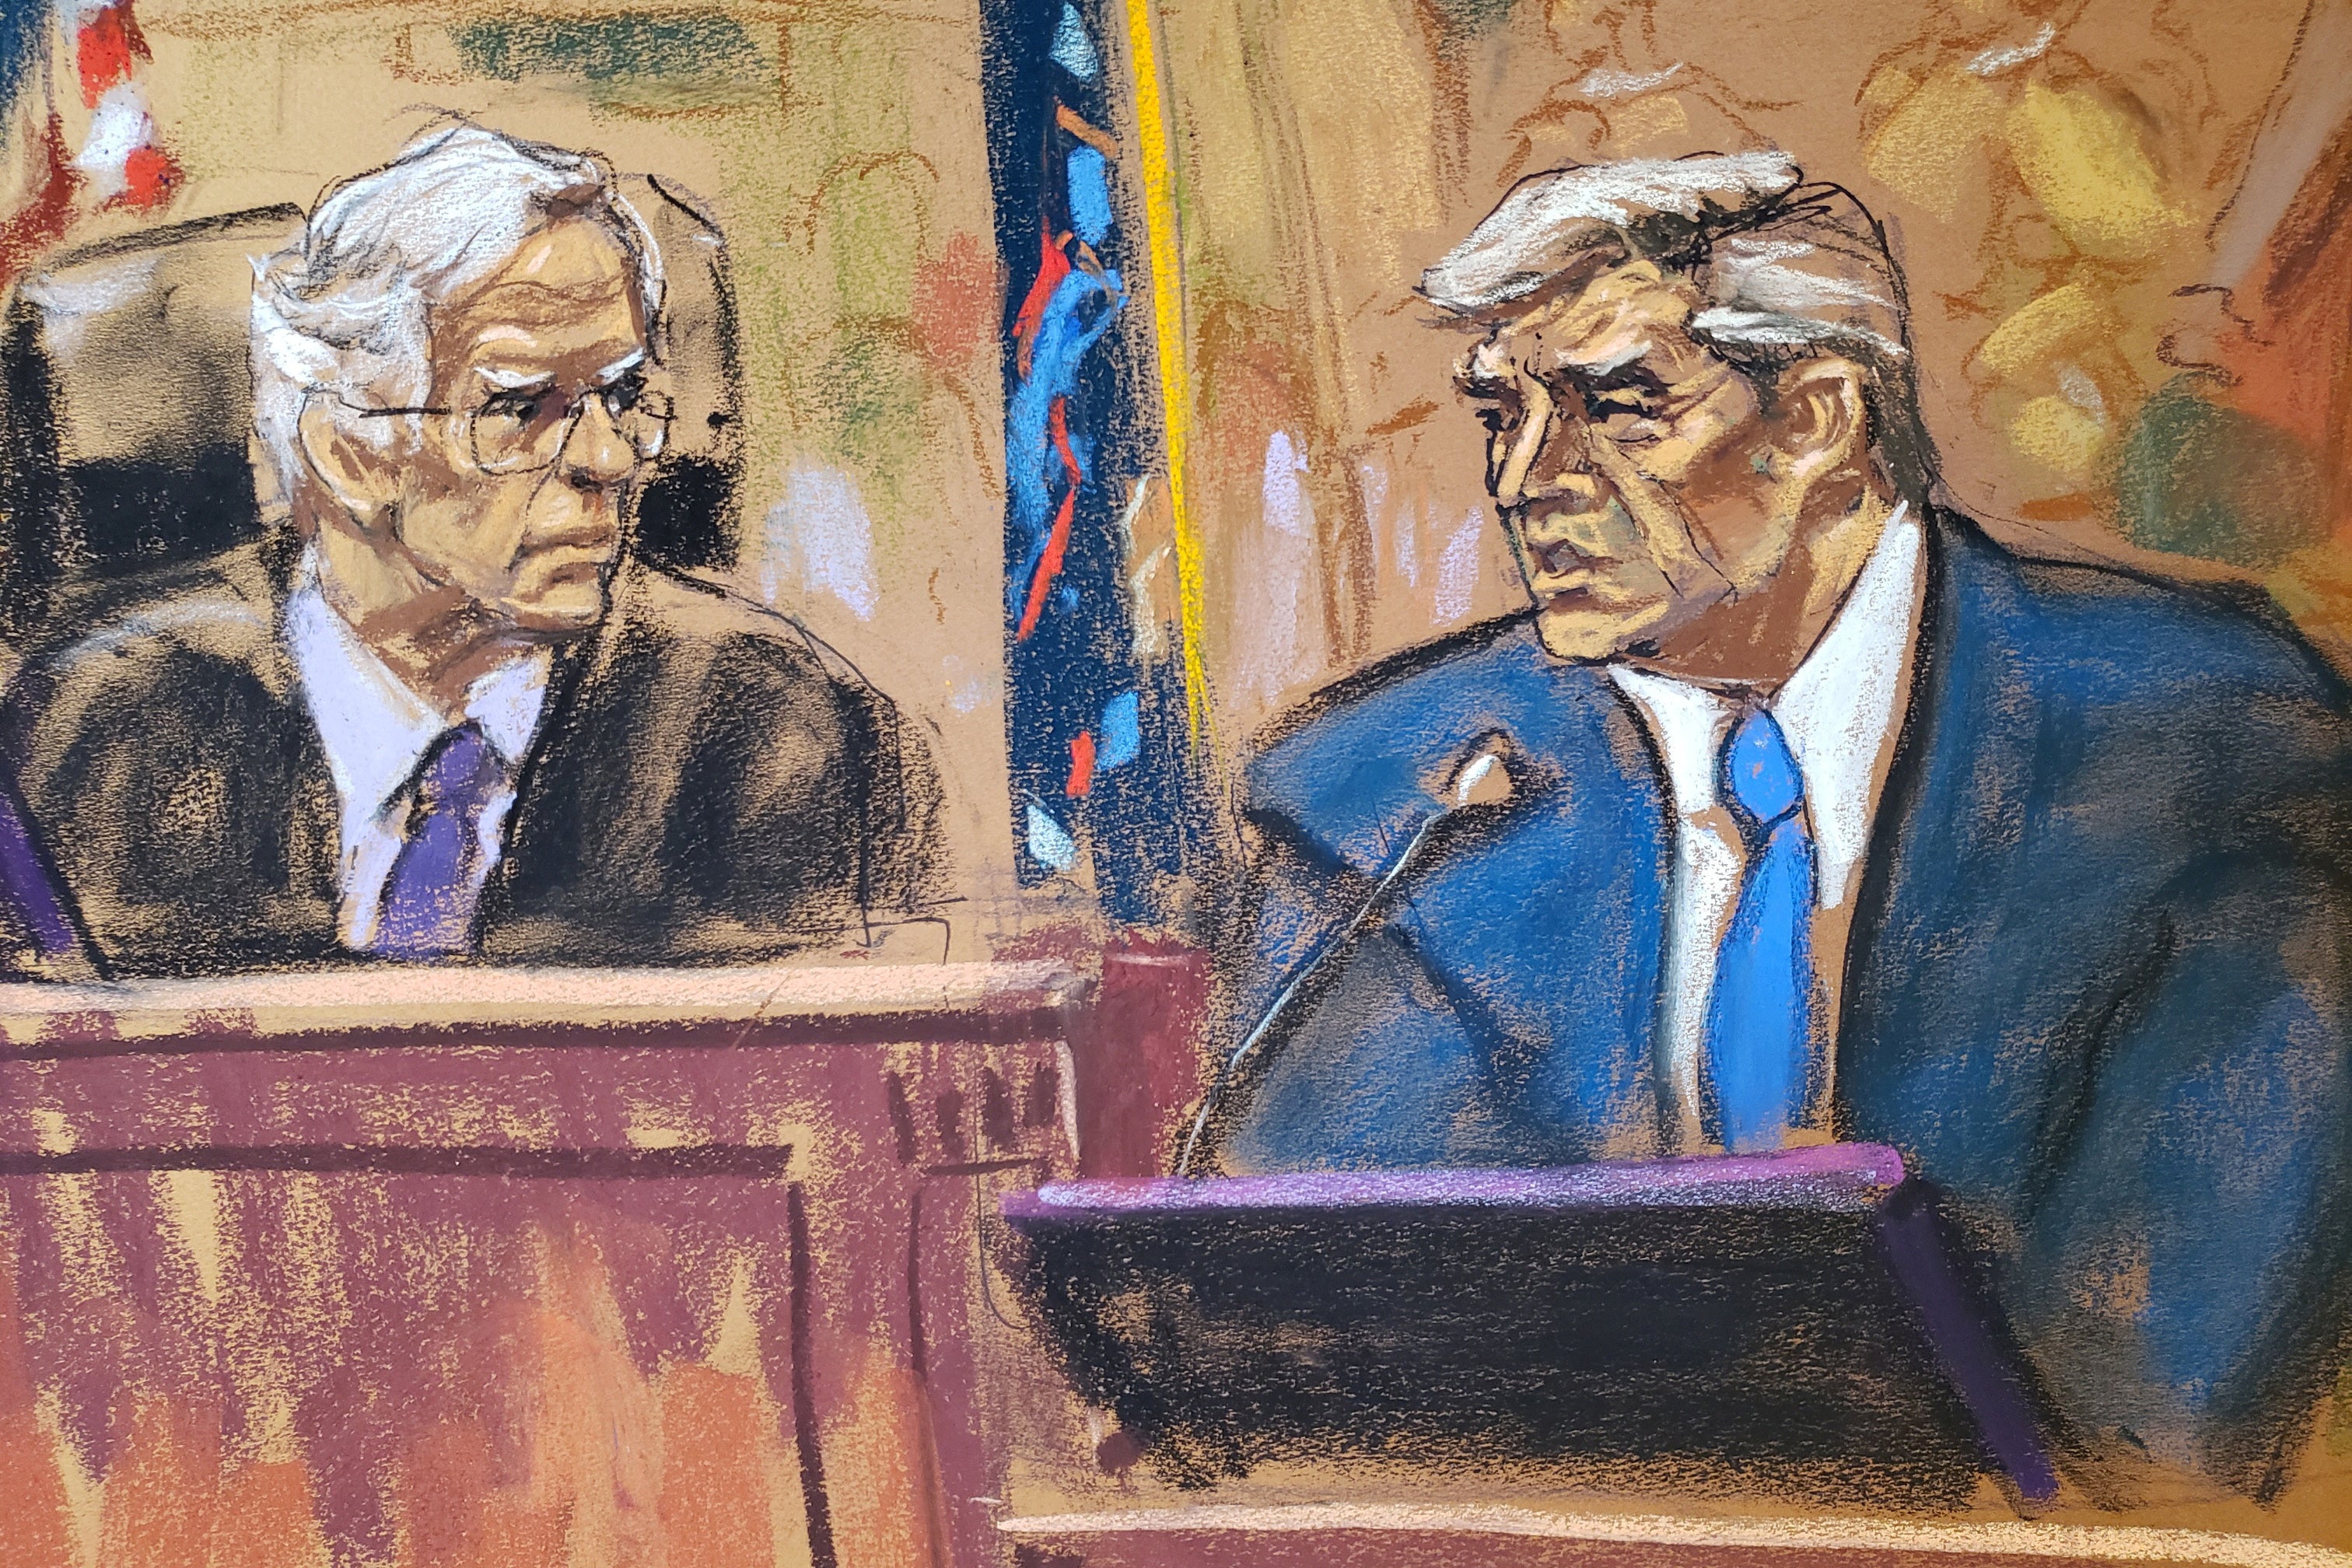 A courtroom sketch depicts Donald Trump on the witness stand in a civil fraud trial with New York Judge Arthur Engoron presiding on 25 October.